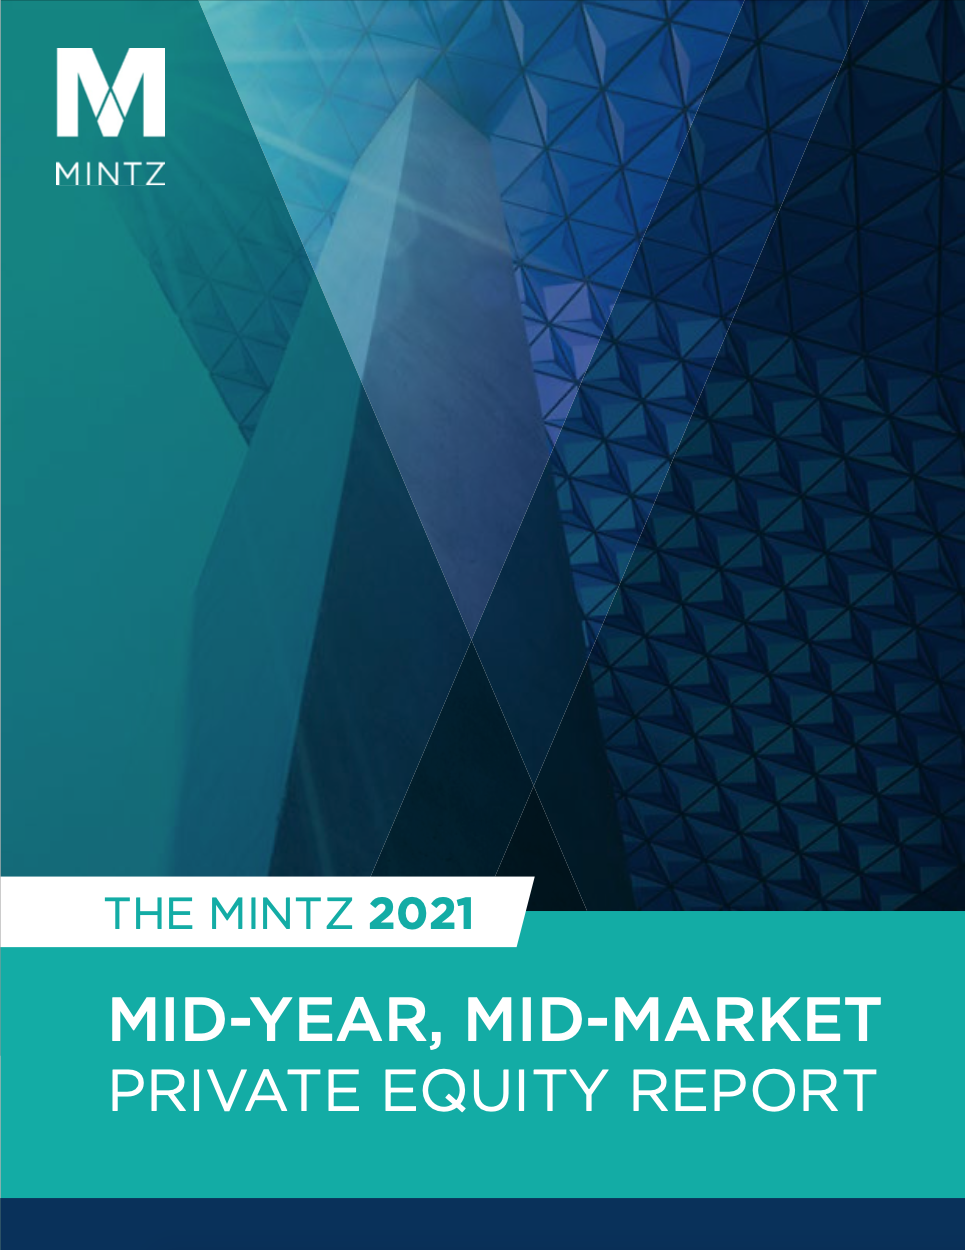 The Mintz 2021 Mid-Year Mid-Market Private Equity Report